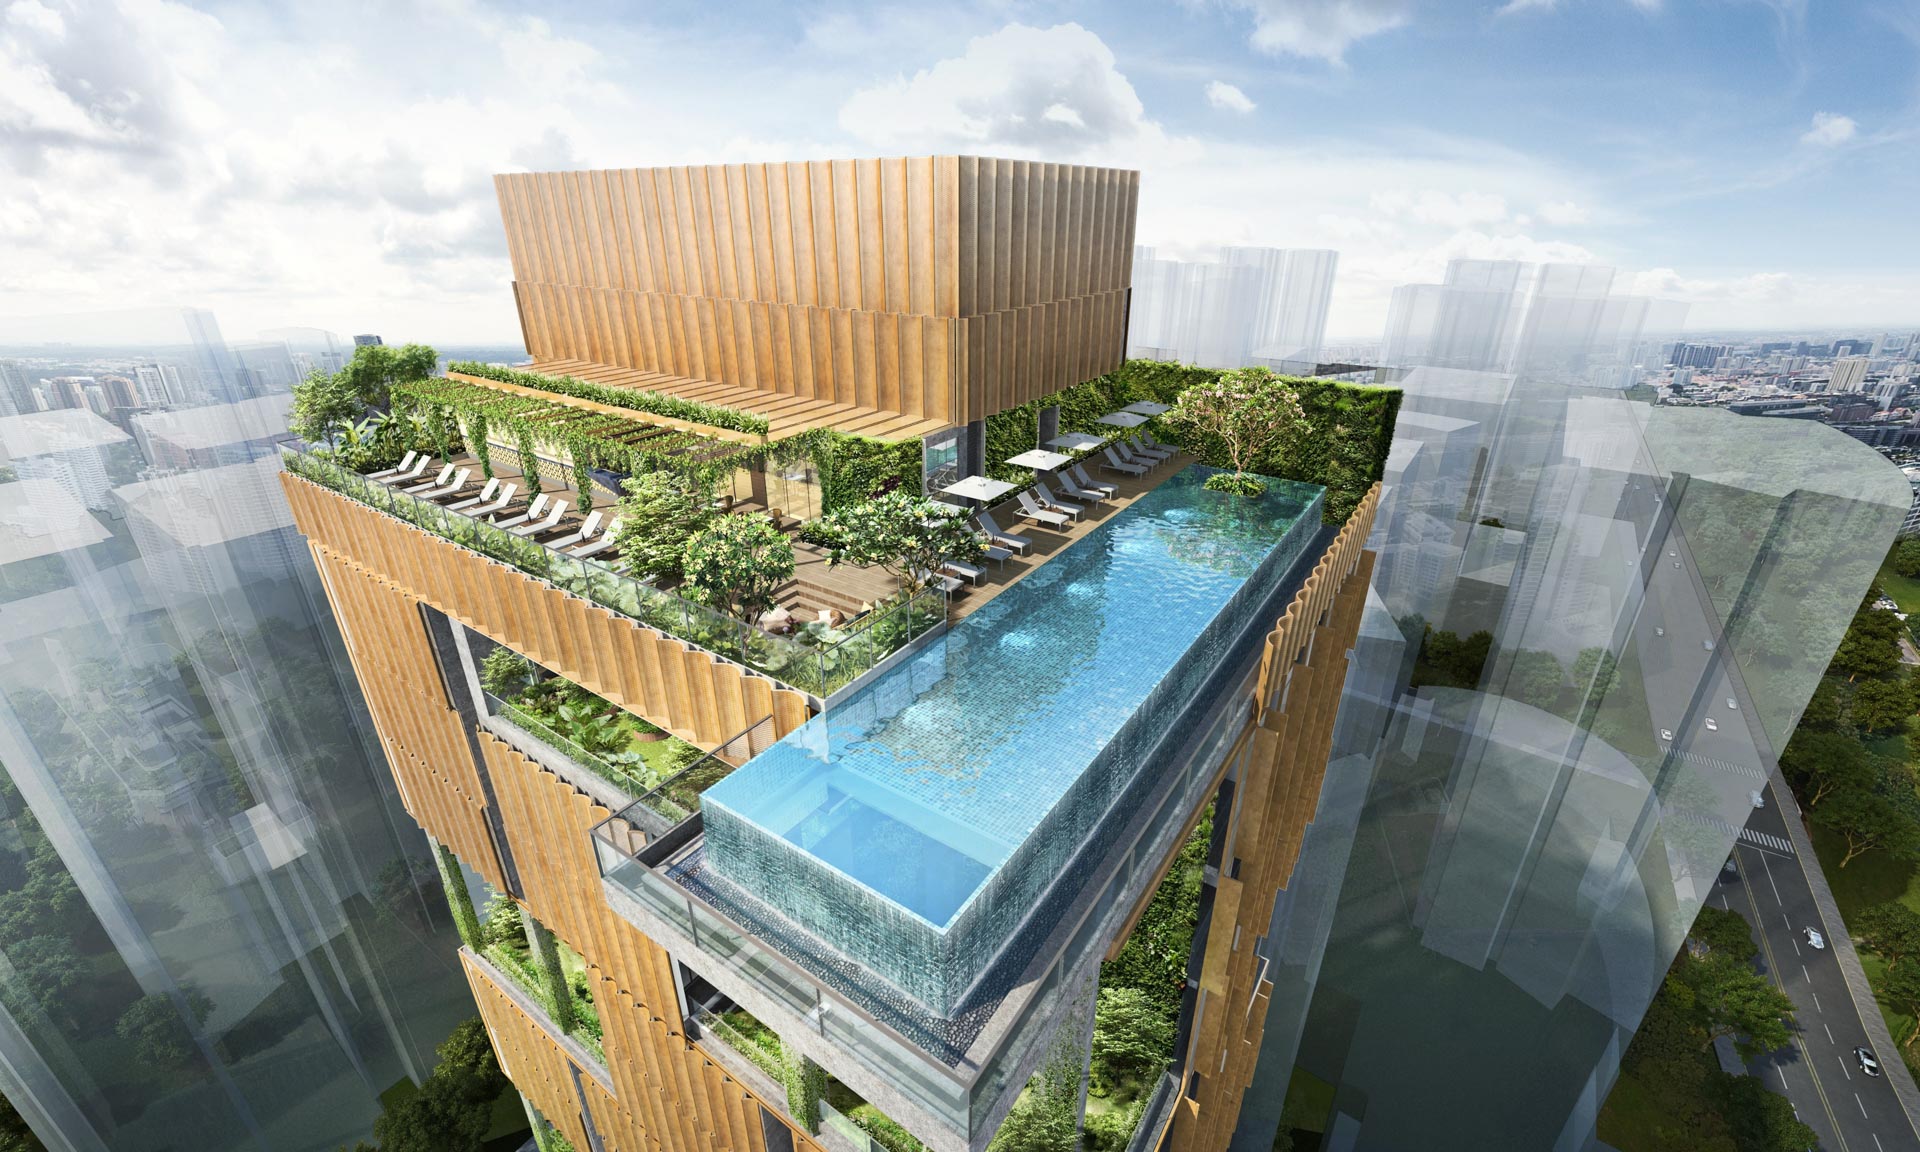 The Rooftop Garden and Pool